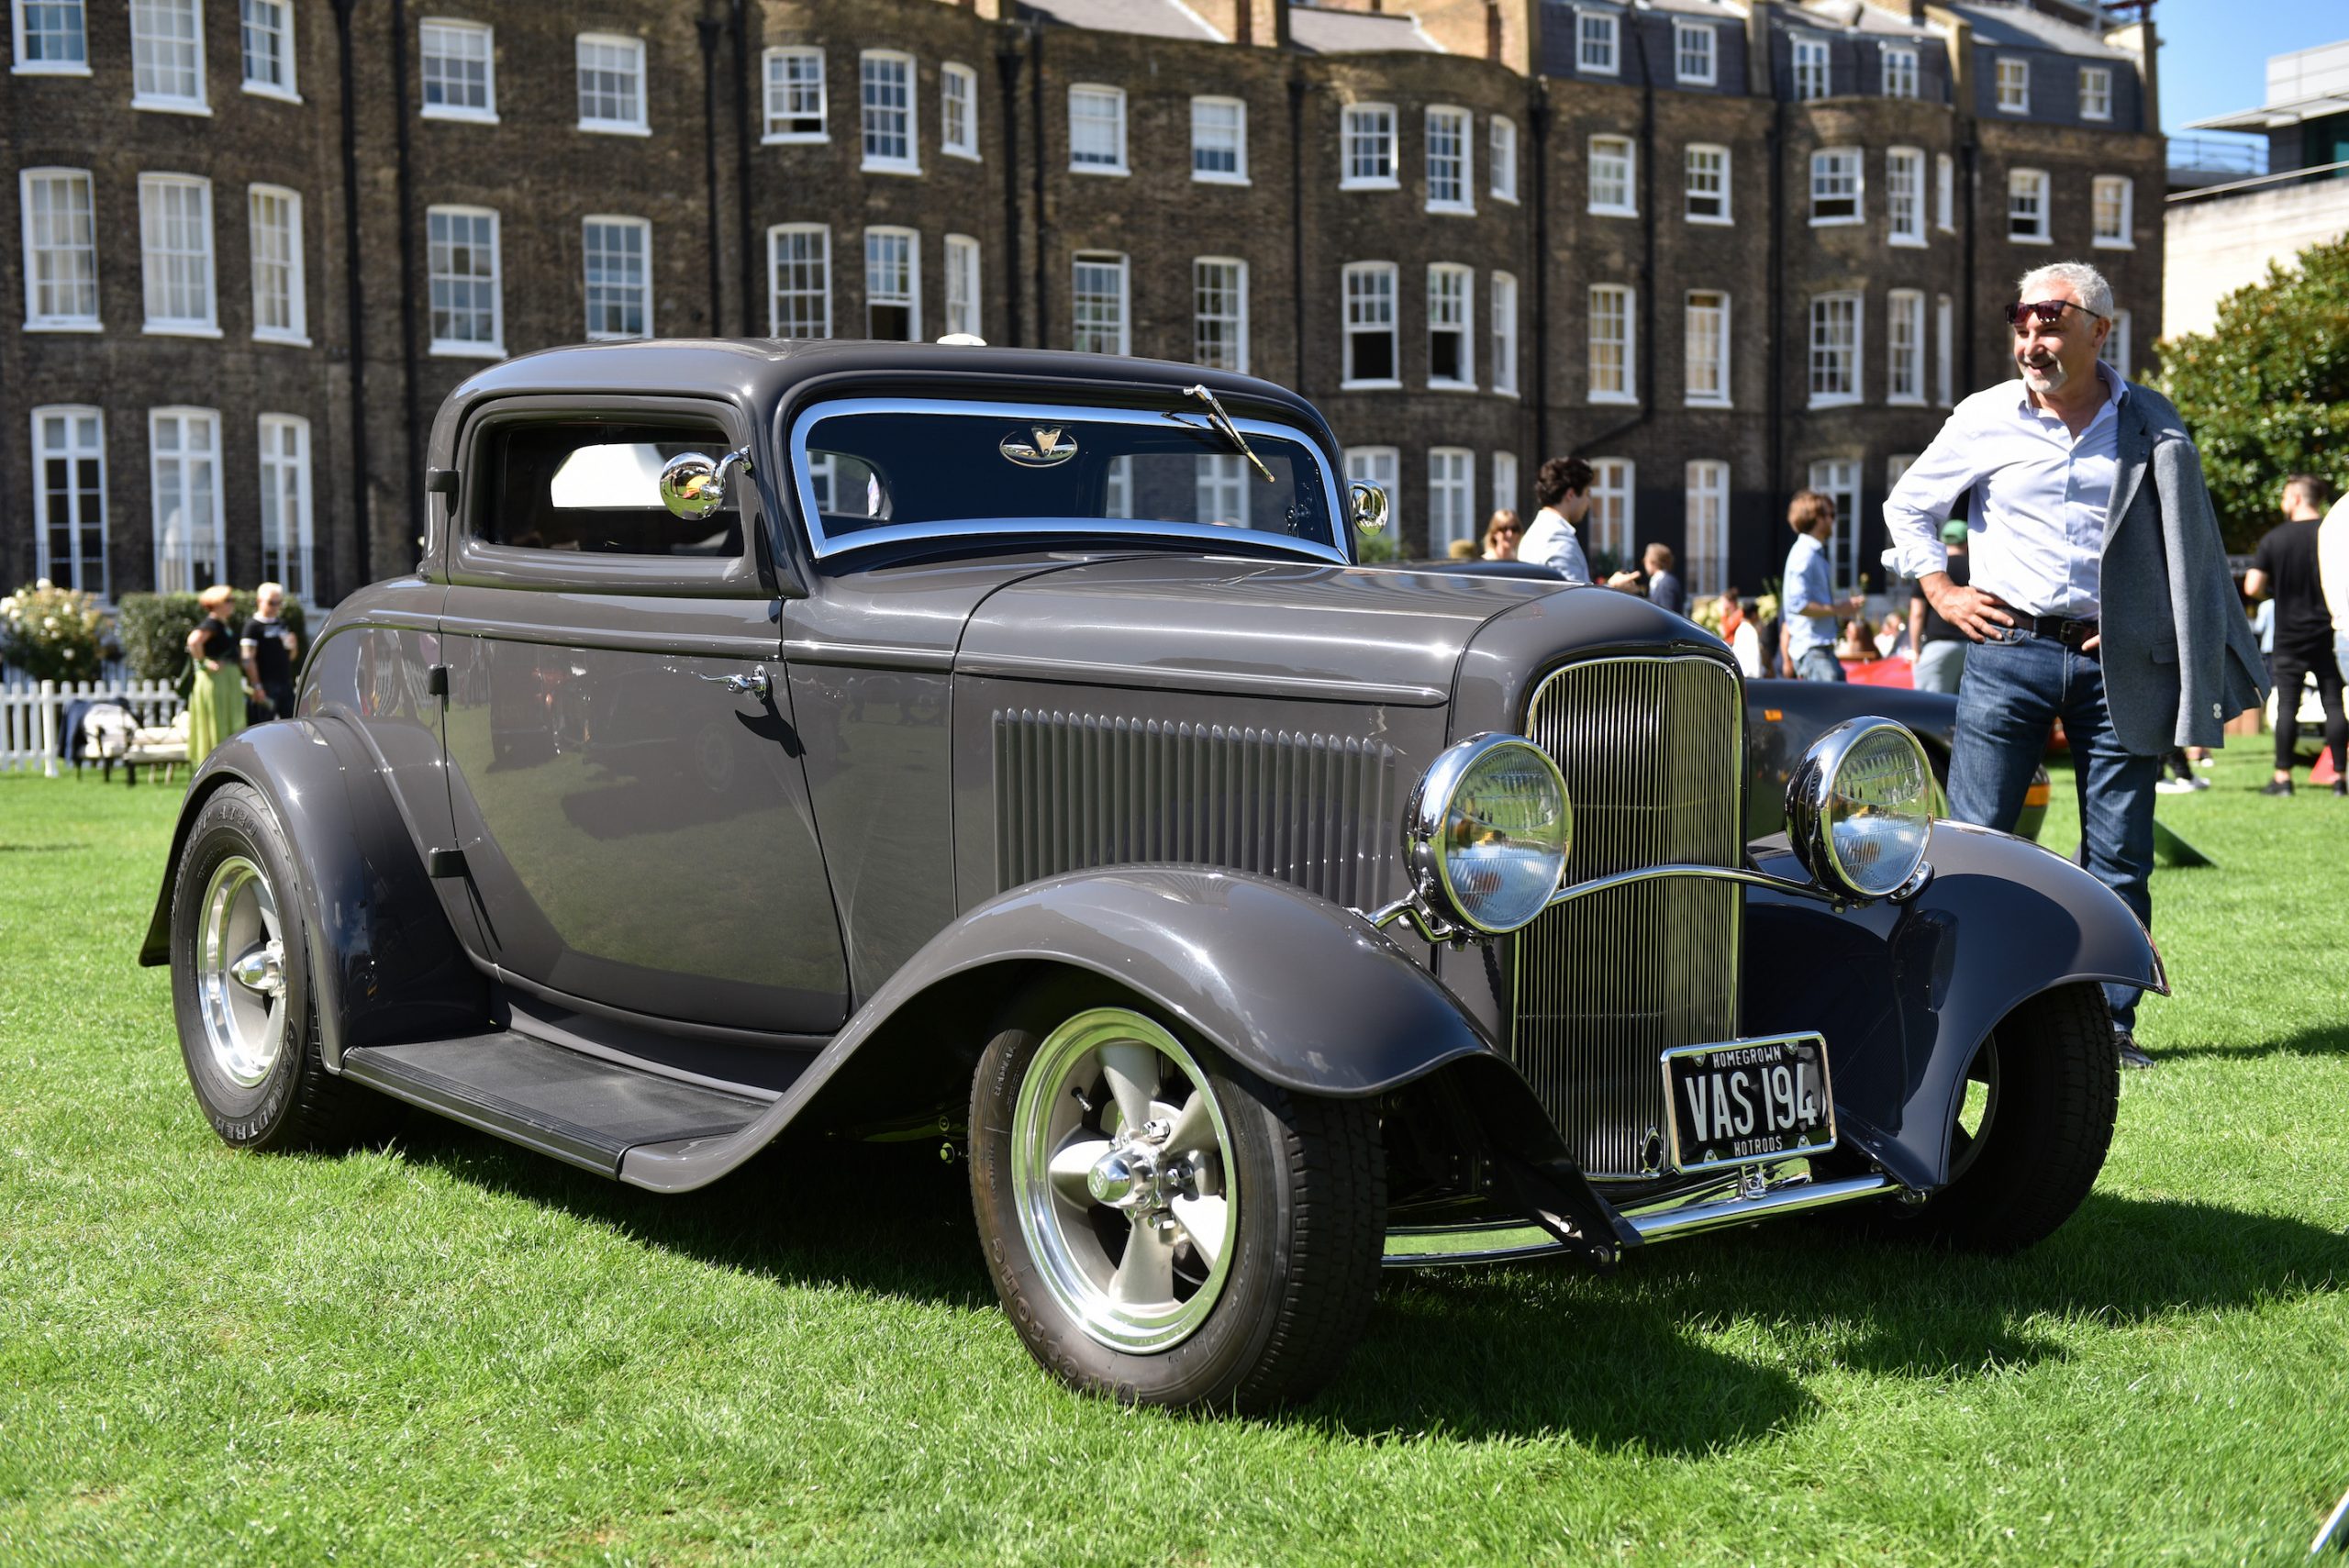 A 1932 Ford Model B hot rod is displayed during the London Concours at Honourable Artillery Company